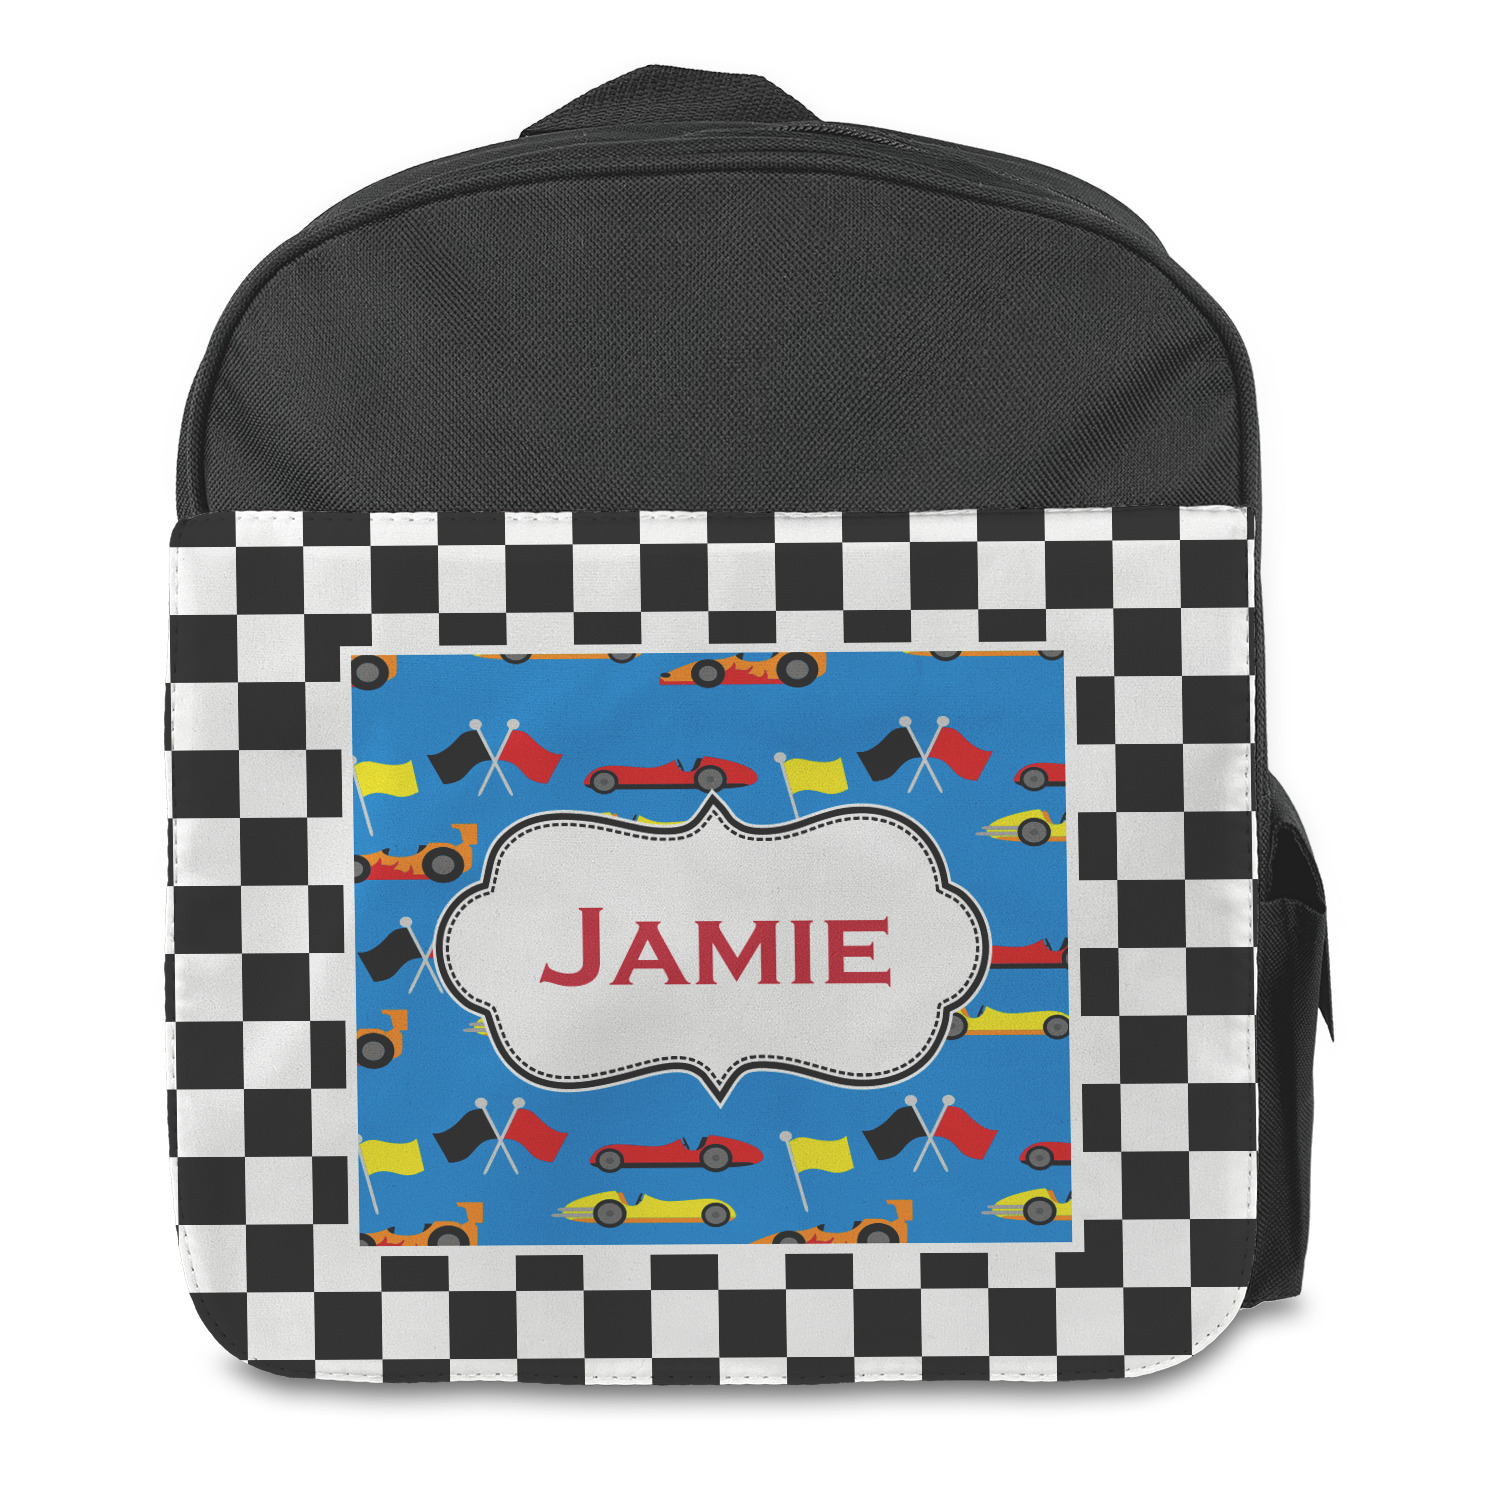 https://www.youcustomizeit.com/common/MAKE/357472/Checkers-Racecars-Kids-Backpack-Front.jpg?lm=1643818888